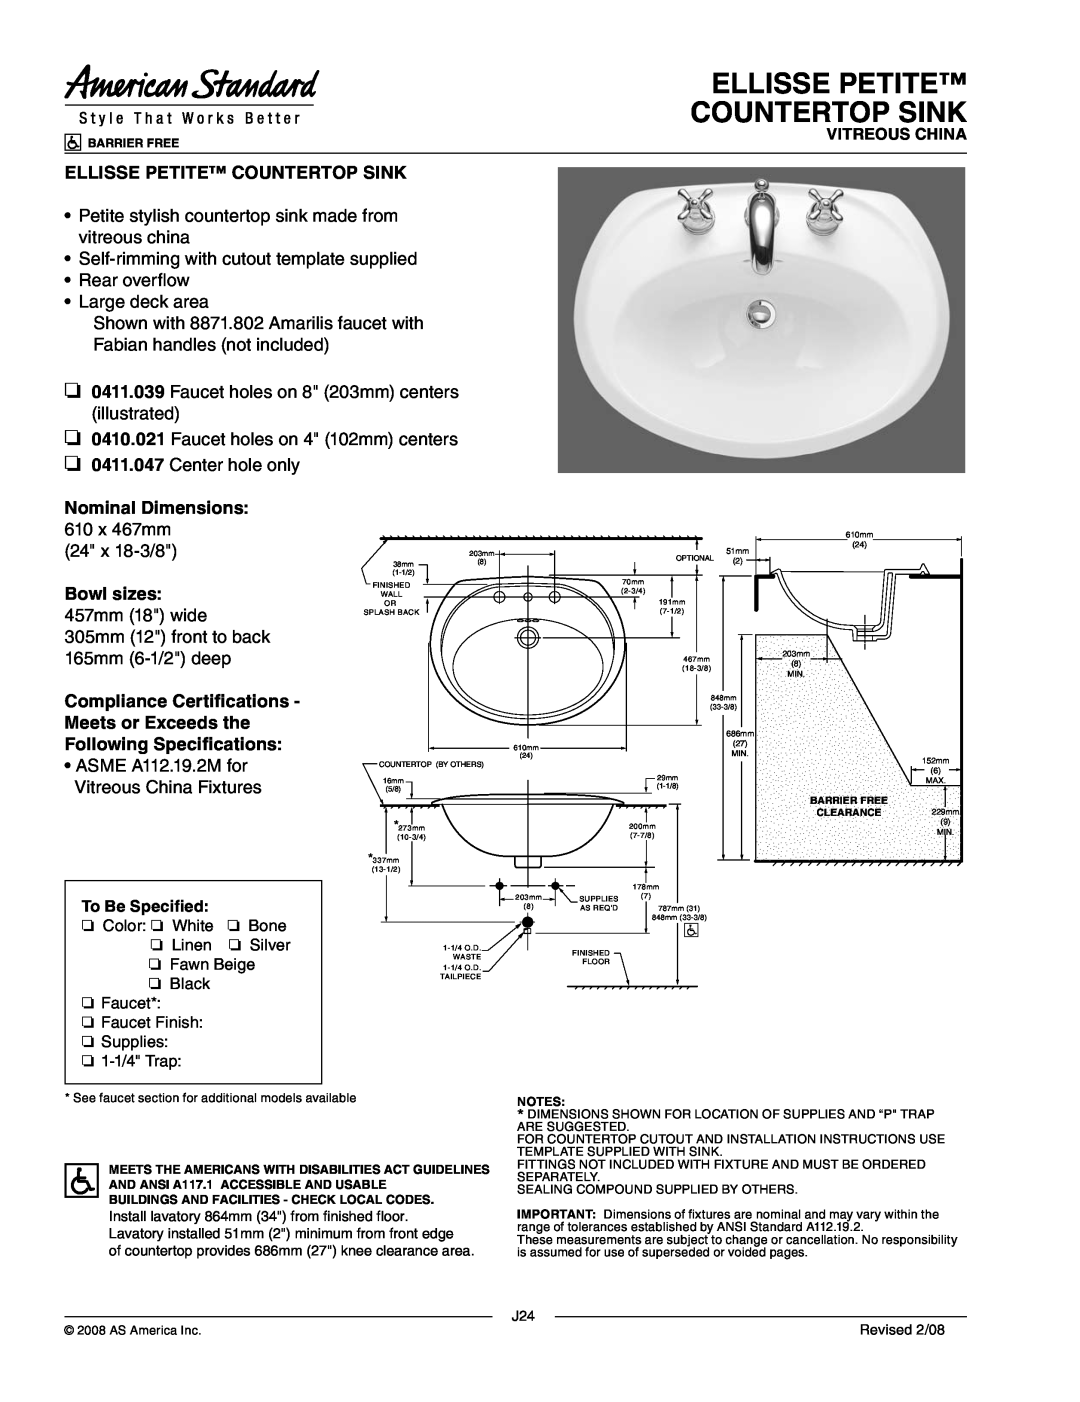 American Standard 0411.047, 0411.039 dimensions Ellisse Petite Countertop Sink, Self-rimmingwith cutout template supplied 